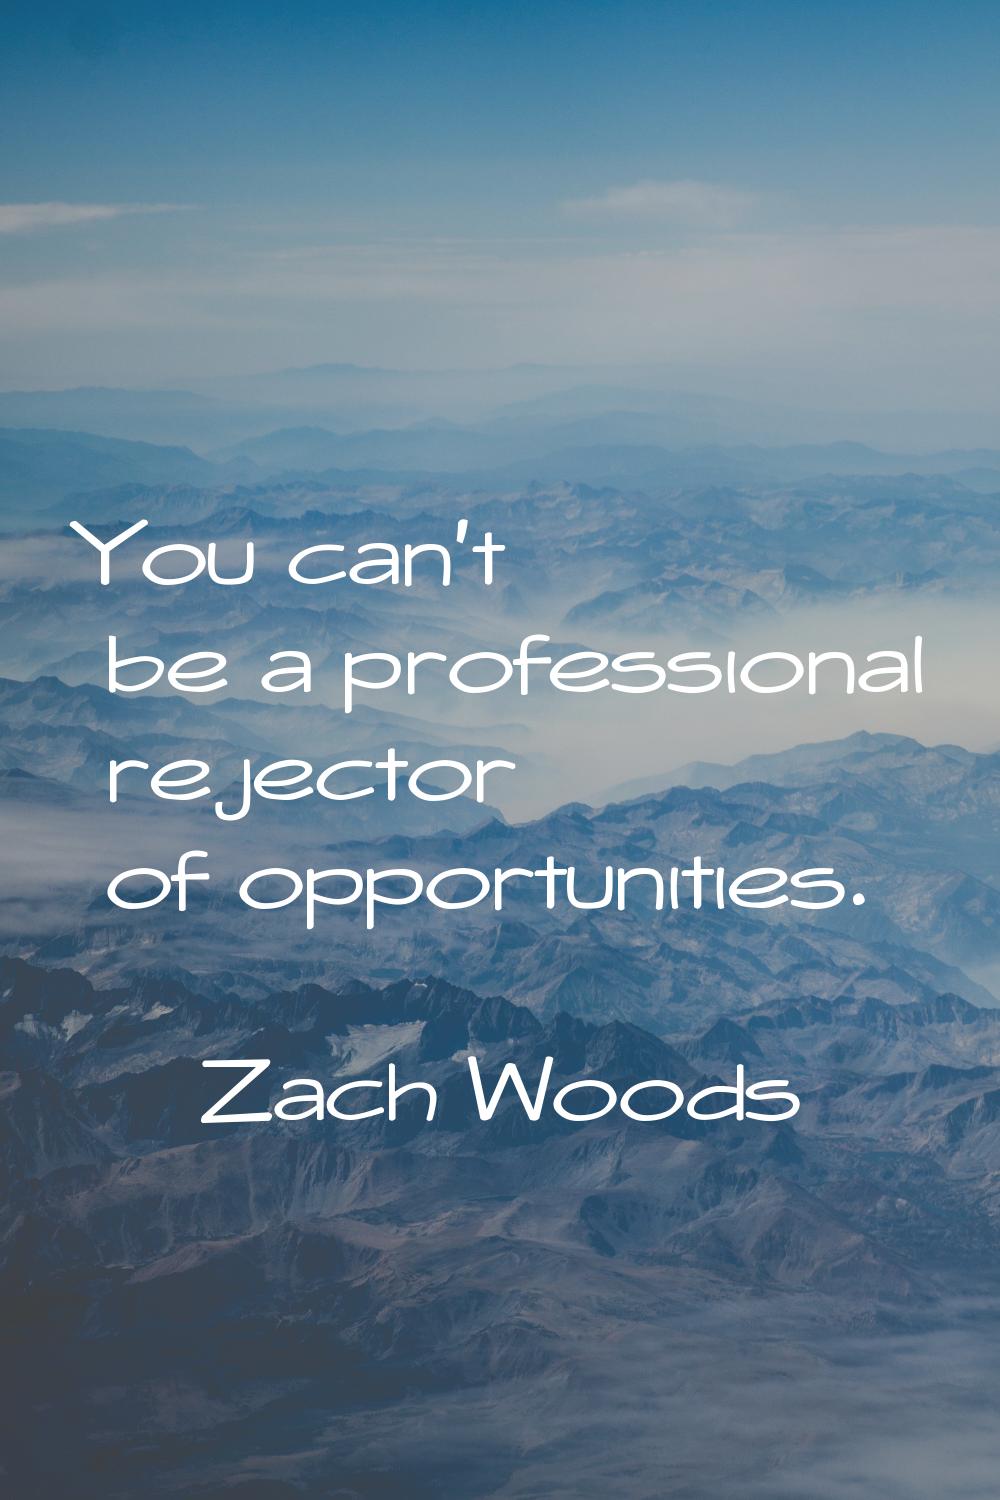 You can't be a professional rejector of opportunities.